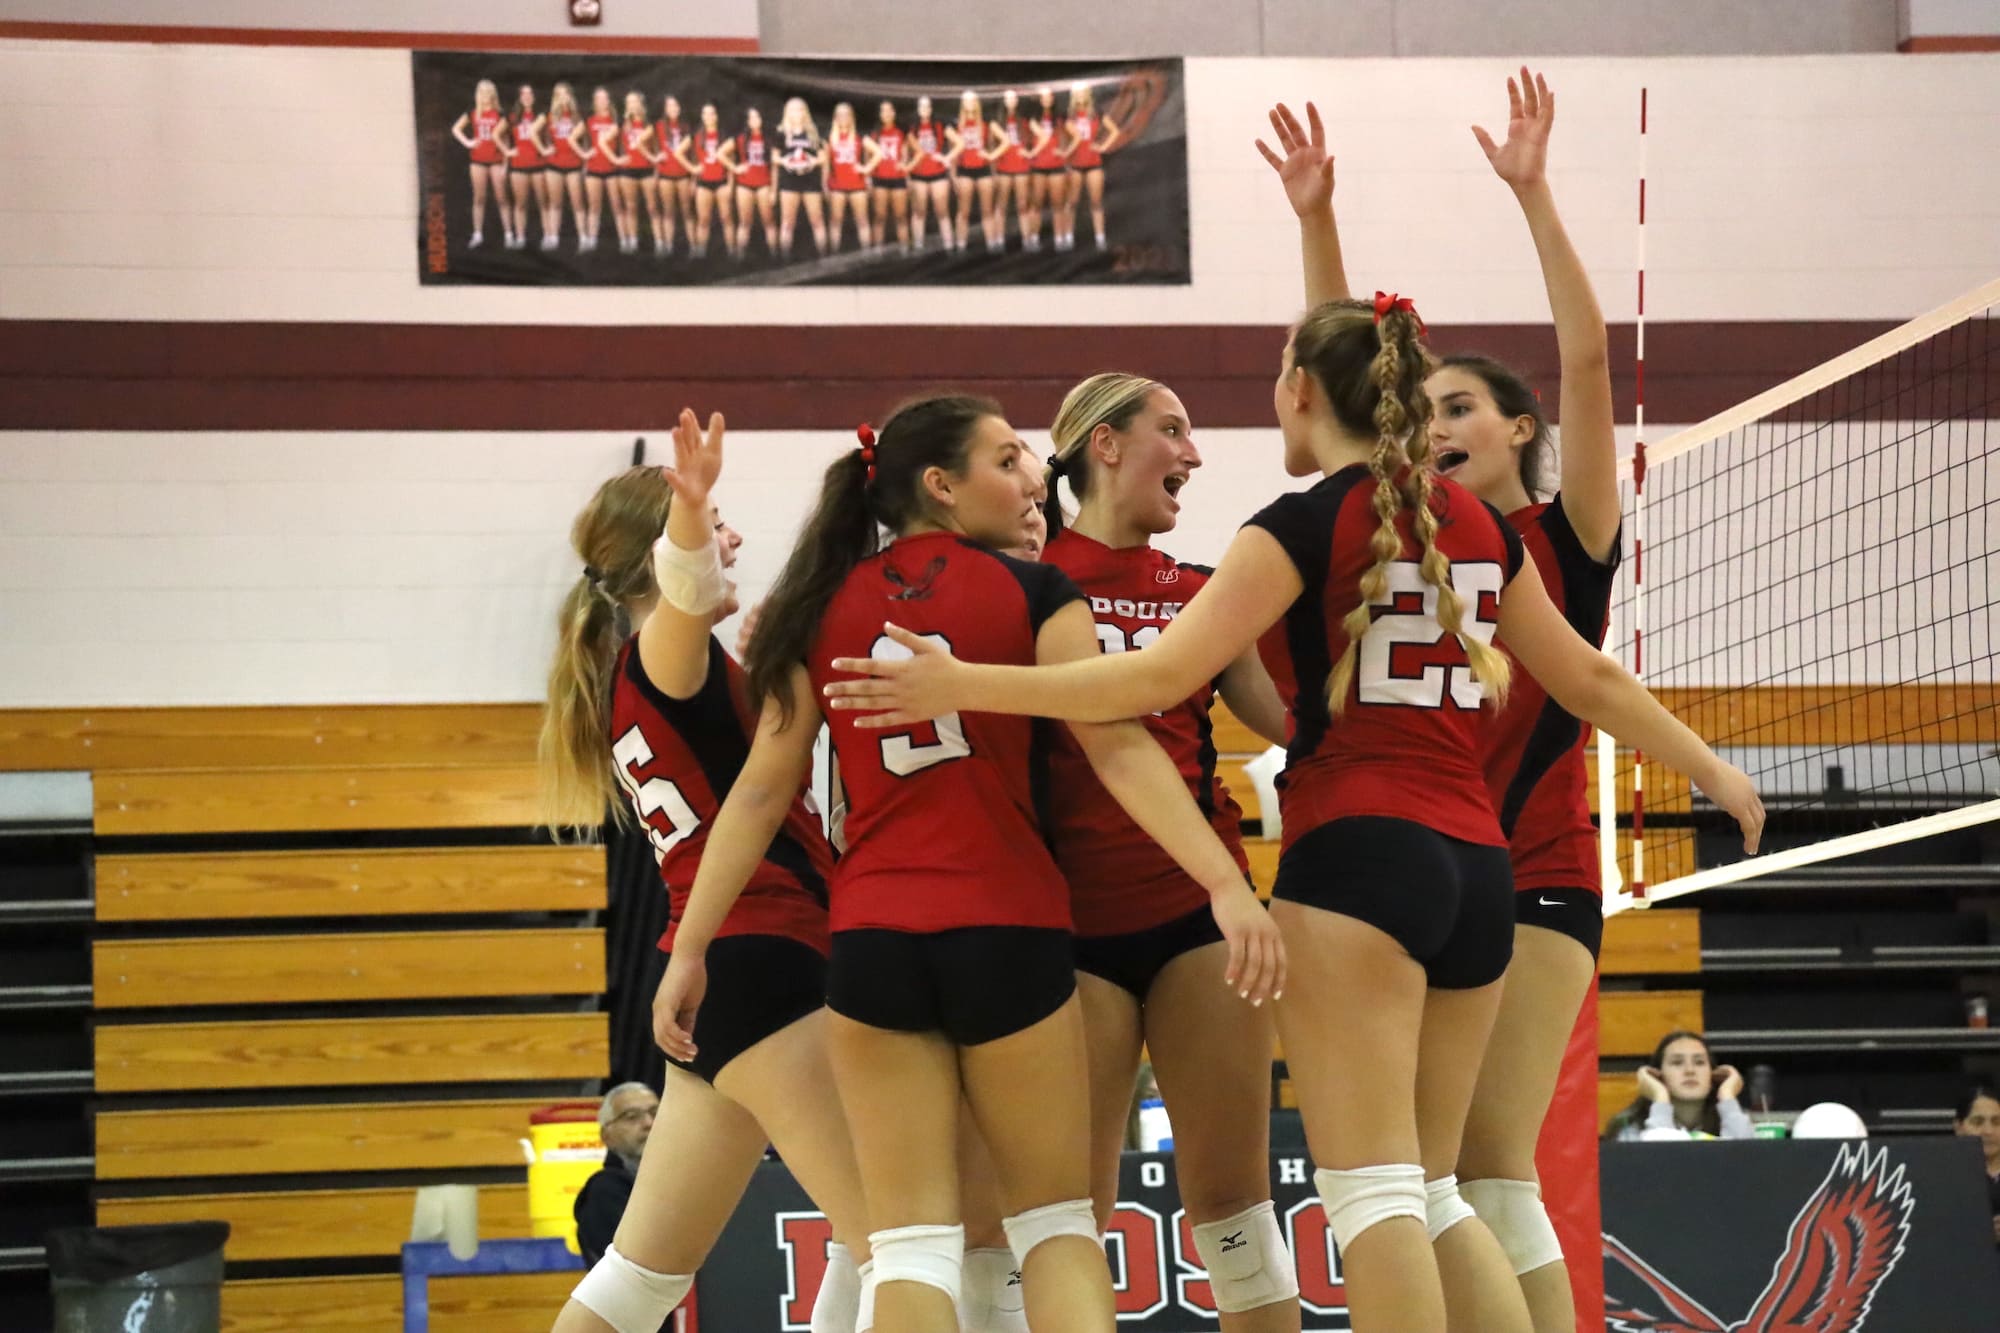 Westborough tops Hudson in battle of volleyball powerhouses